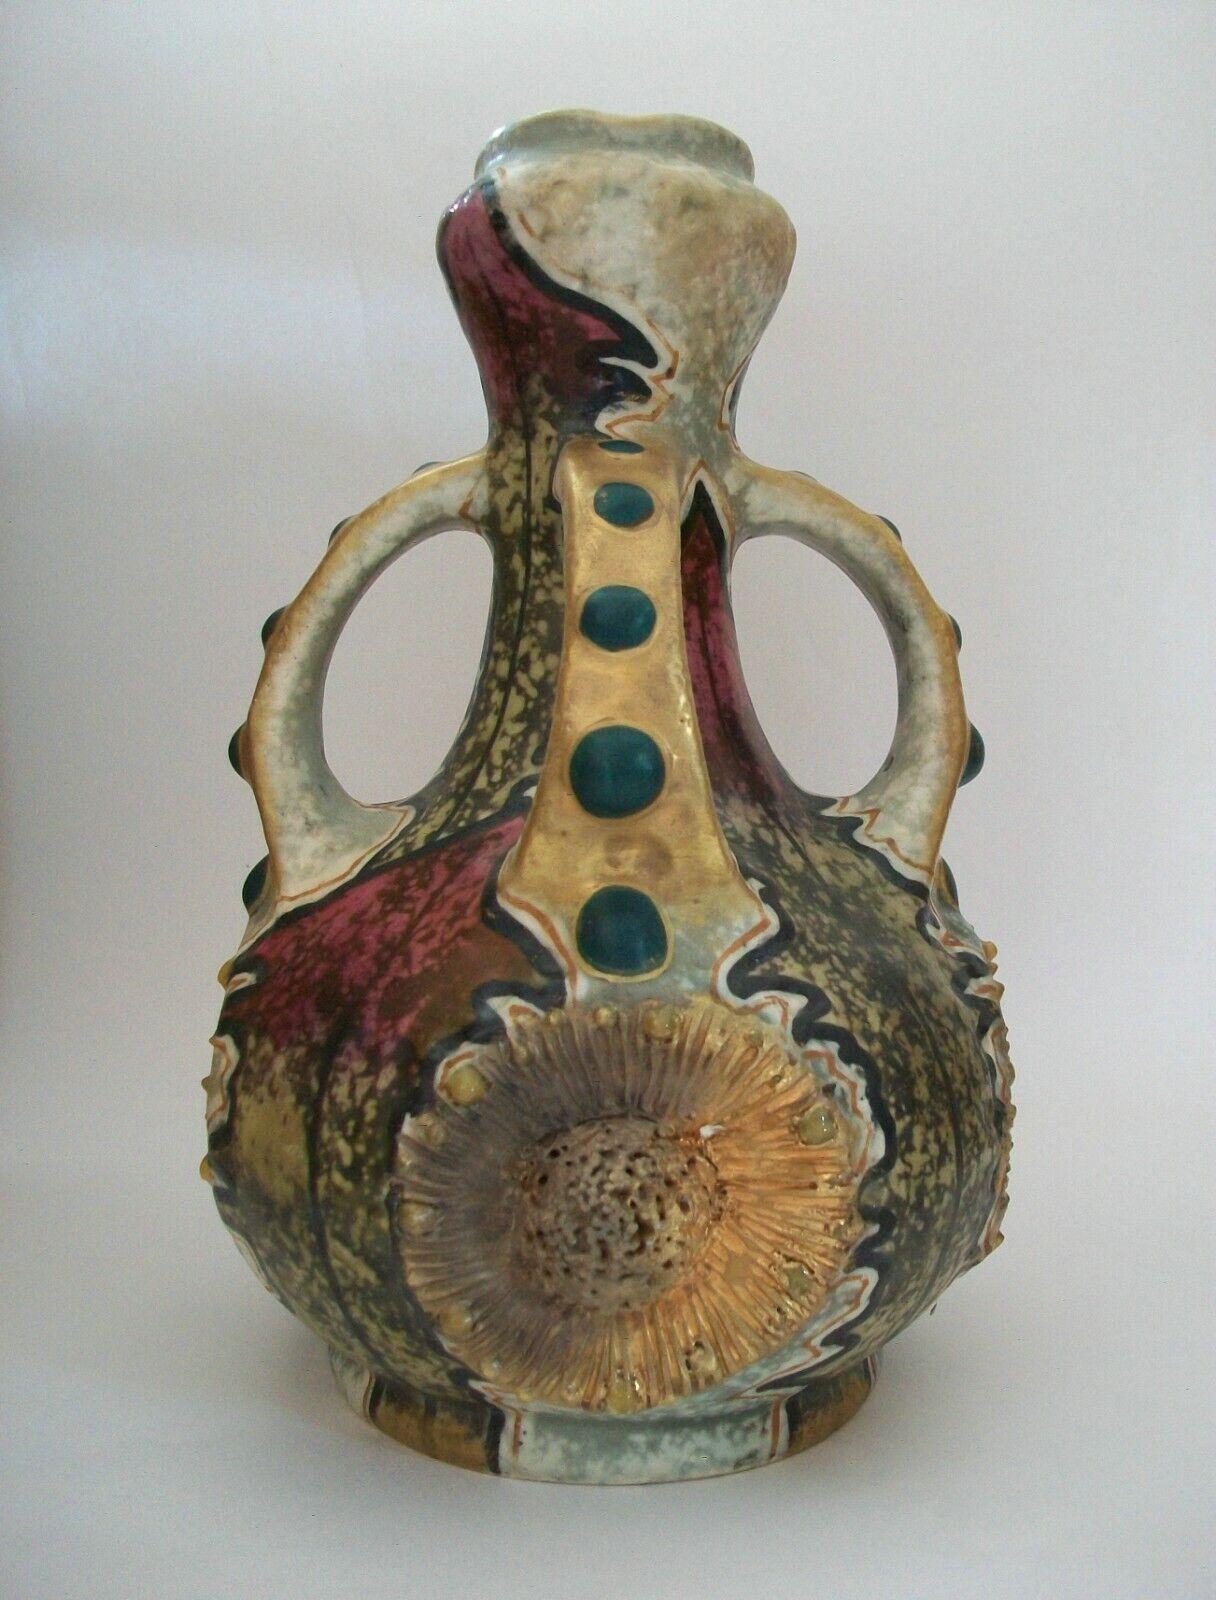 Riessner, Stellmacher & Kessel - Imperial Amphora - Art Nouveau buttressed ceramic vase with embossed sunflowers, painted leaves and applied 'jewels' - signed on the base - Austria - circa 1900.

Excellent antique condition - minor scuffs - no